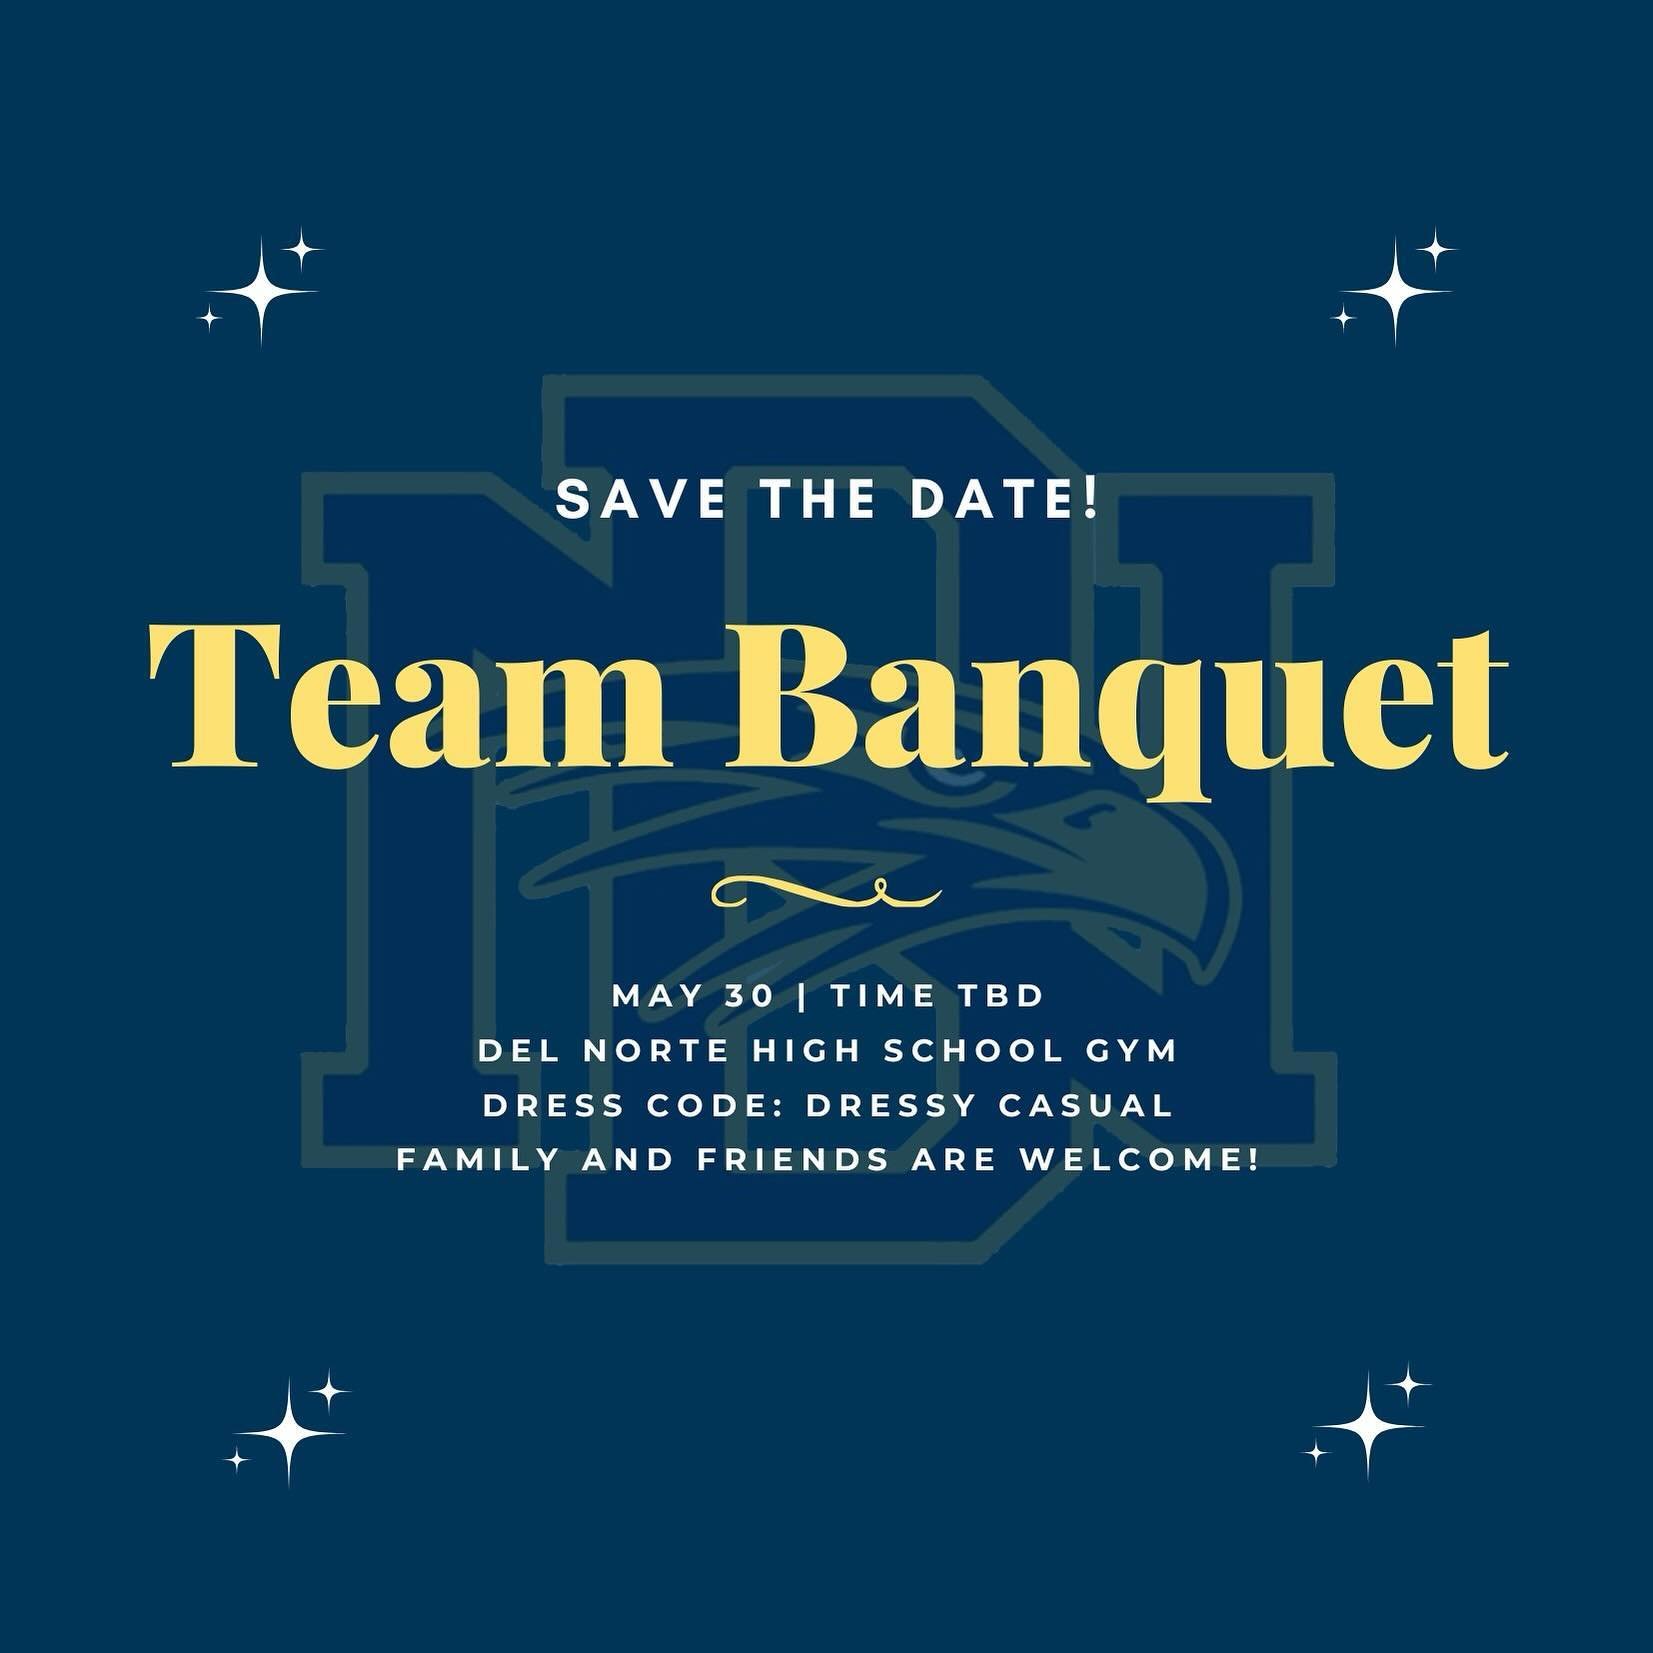 SAVE THE DATE for our team banquet on May 30th! Family and friends are welcome! See you there🏃💨